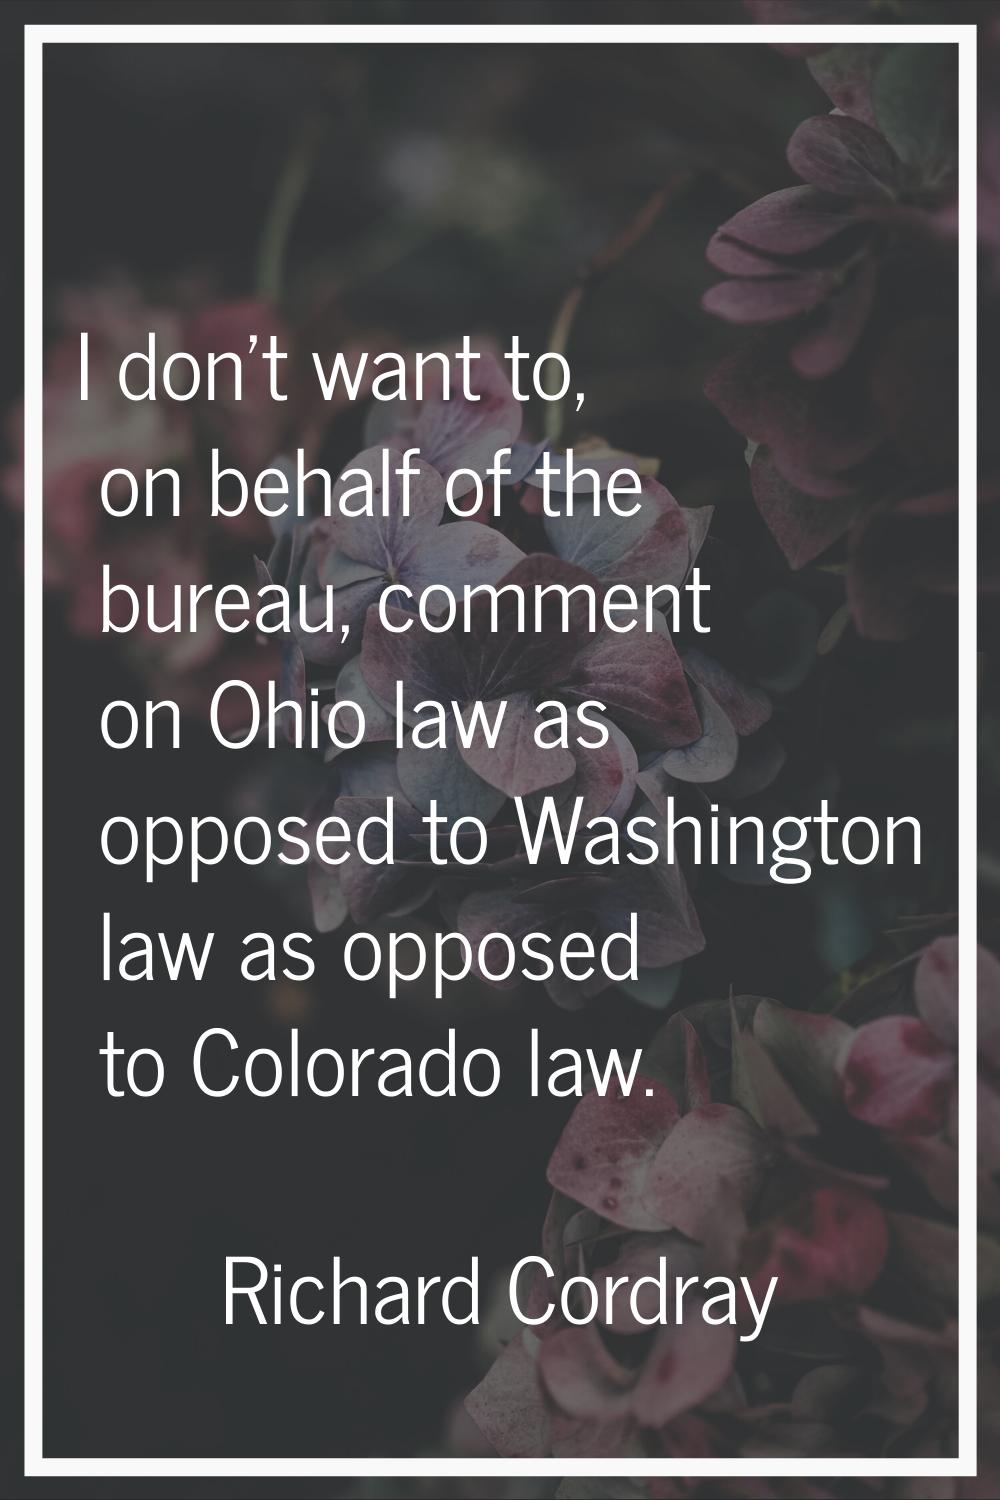 I don't want to, on behalf of the bureau, comment on Ohio law as opposed to Washington law as oppos